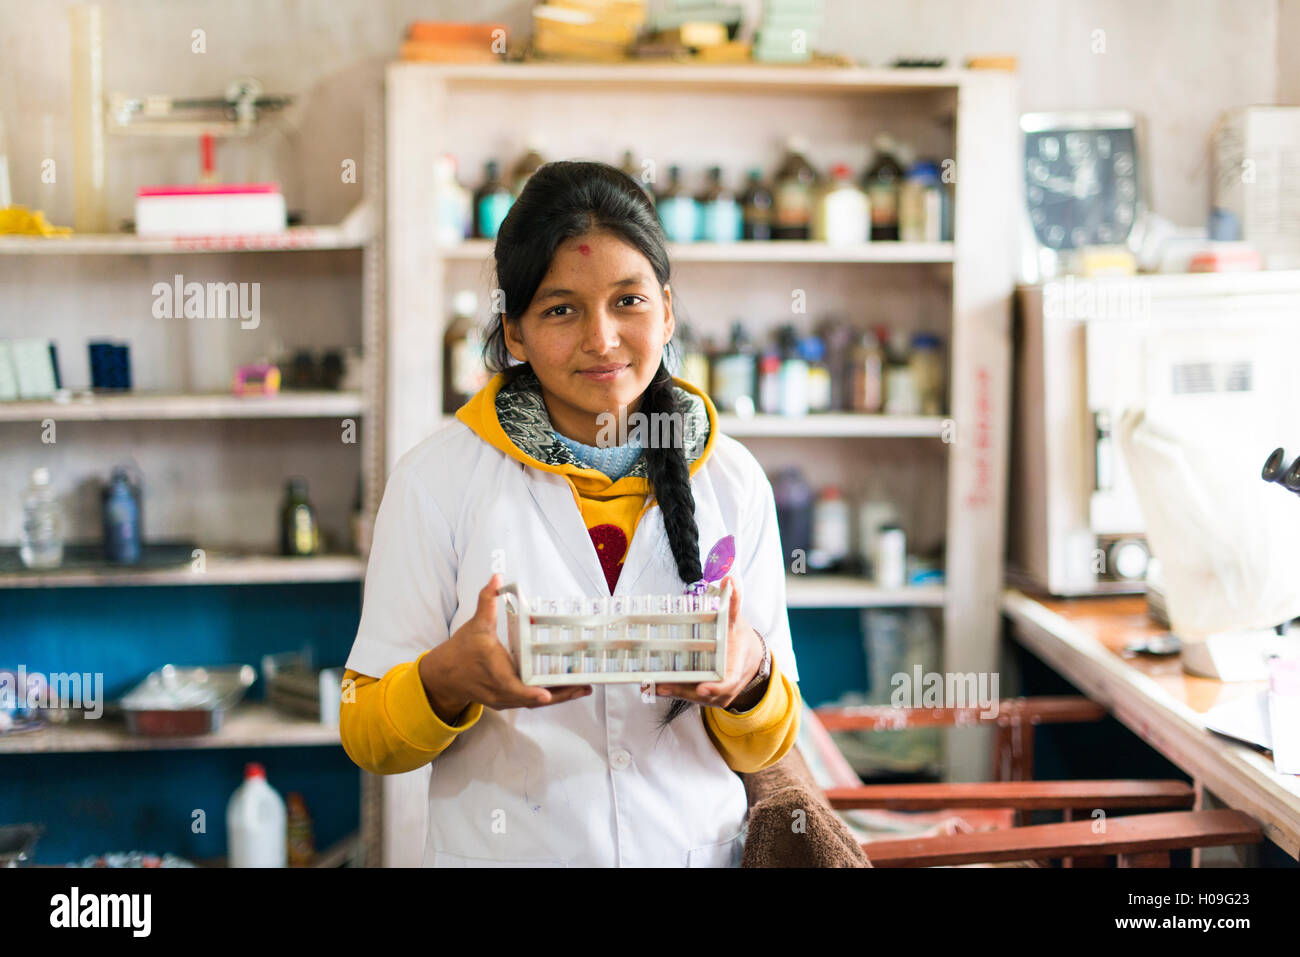 A young lab technician in a hospital in Nepal holds a rack of test tubes, Diktel, Khotang District, Nepal, Asia Stock Photo